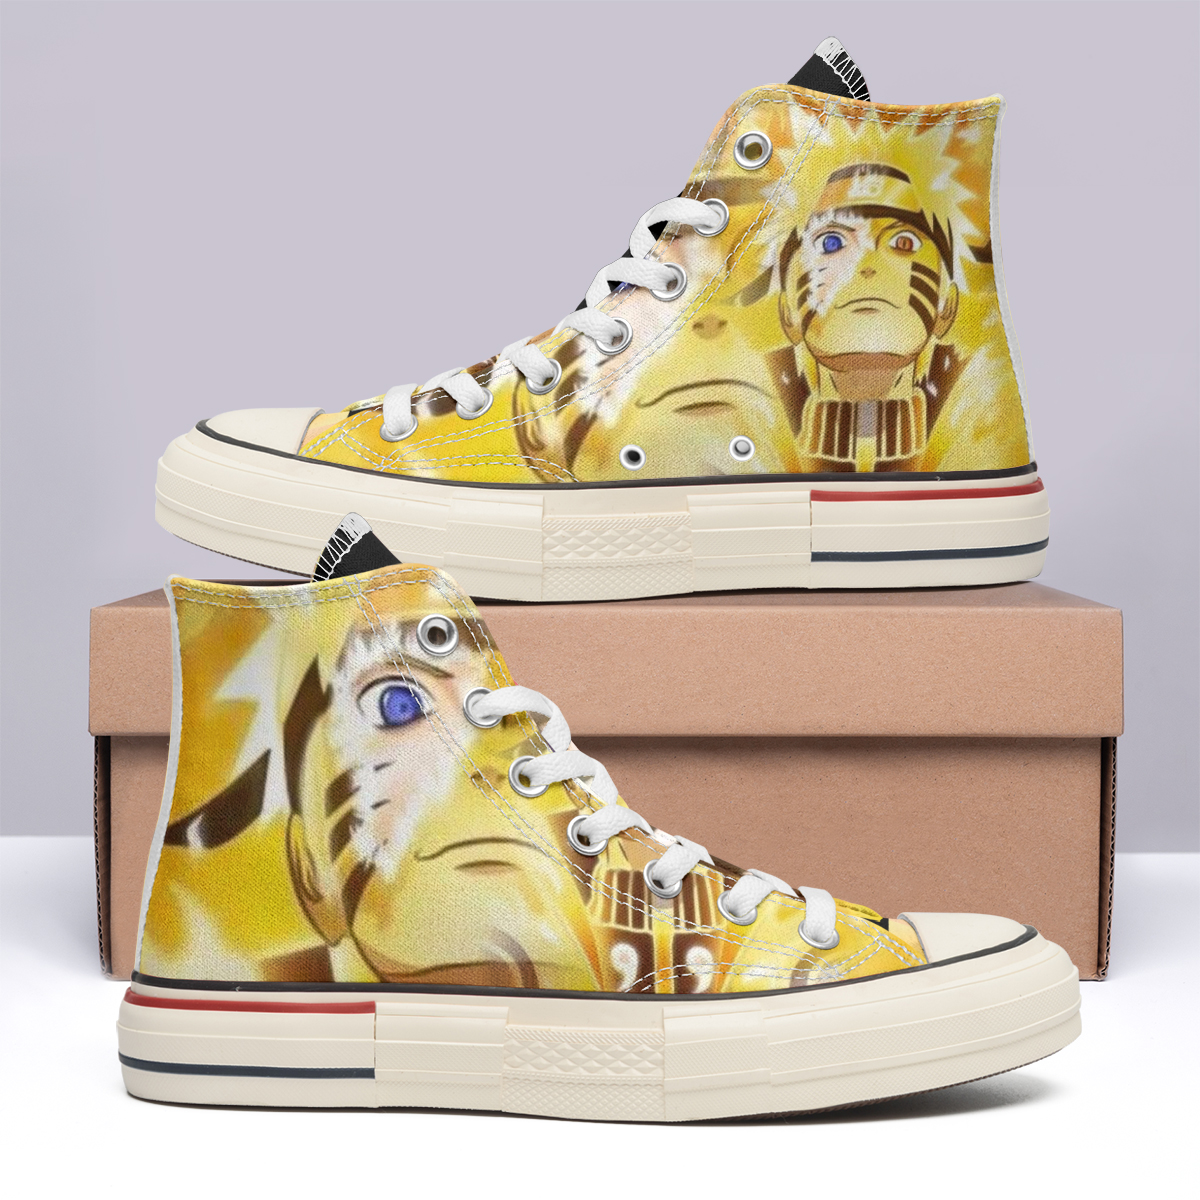 Pokemon Under The Sea High Top Canvas Shoes Special Edition